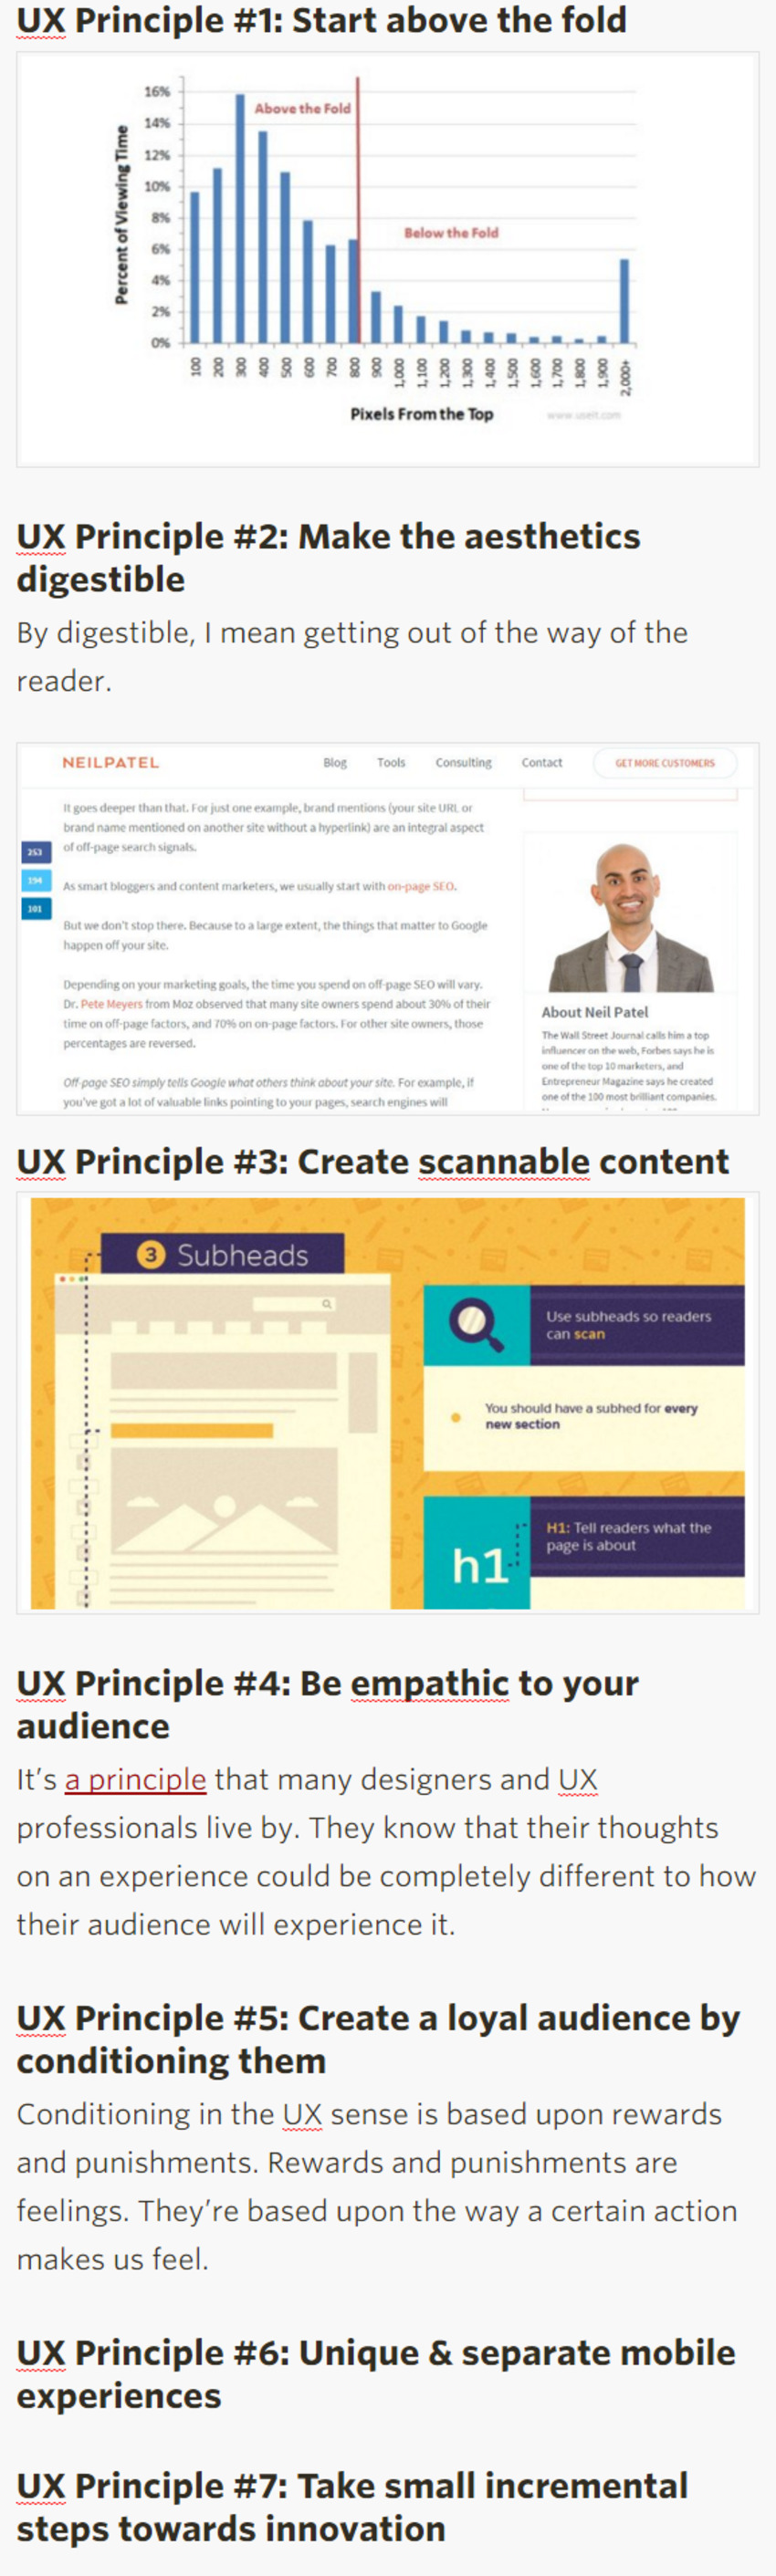 7 UX Principles to Include in Your Content That Will Hook Readers | @contentmrktrapp | The MarTech Digest | Scoop.it